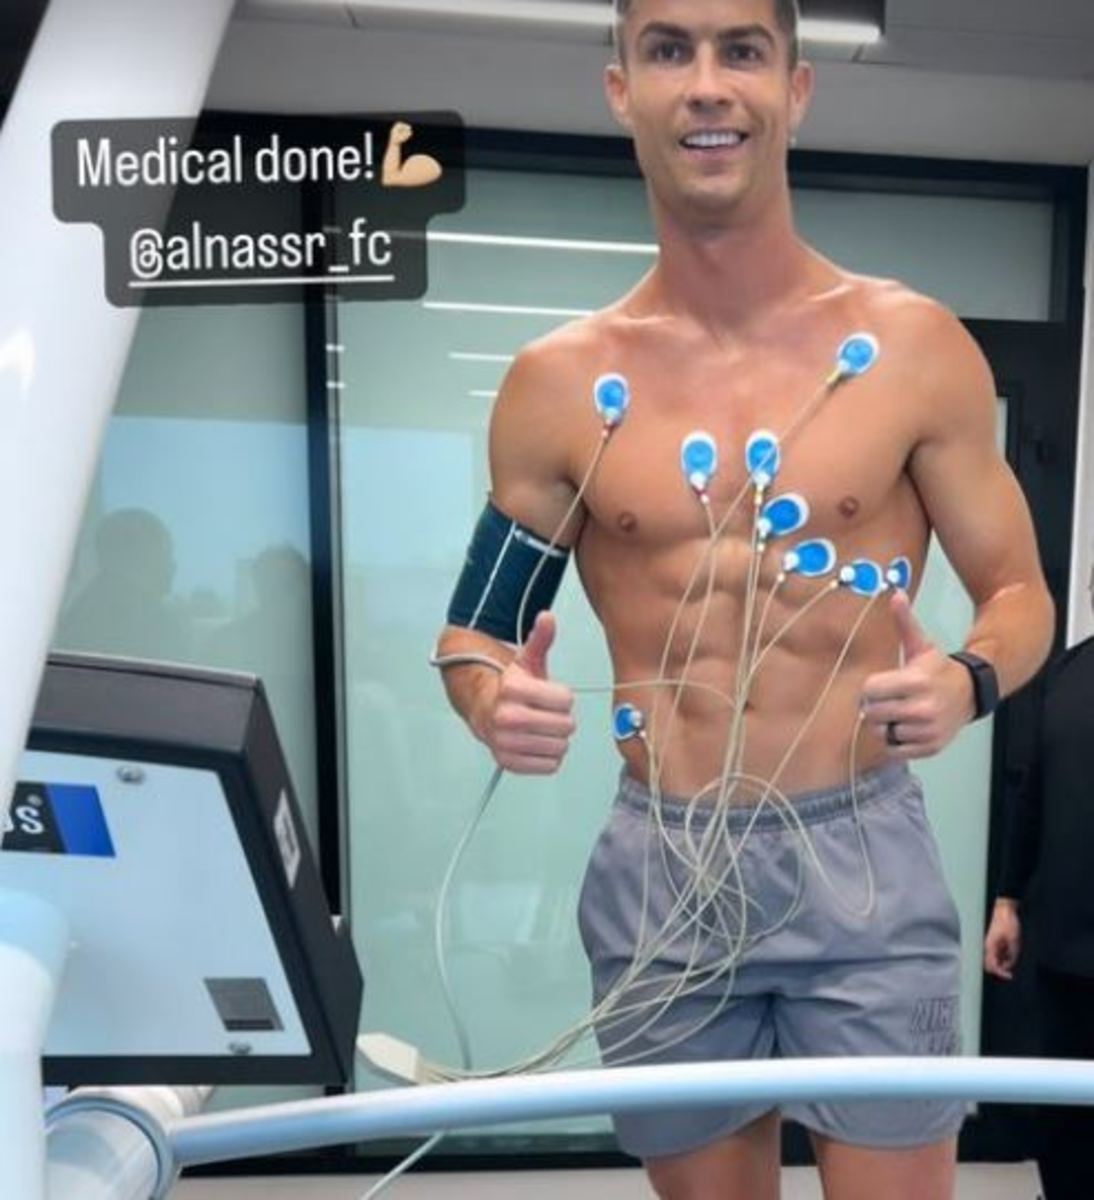 Al Nassr forward Cristiano Ronaldo pictured posing with his thumbs up after passing a medical examination in Saudi Arabia in January 2023